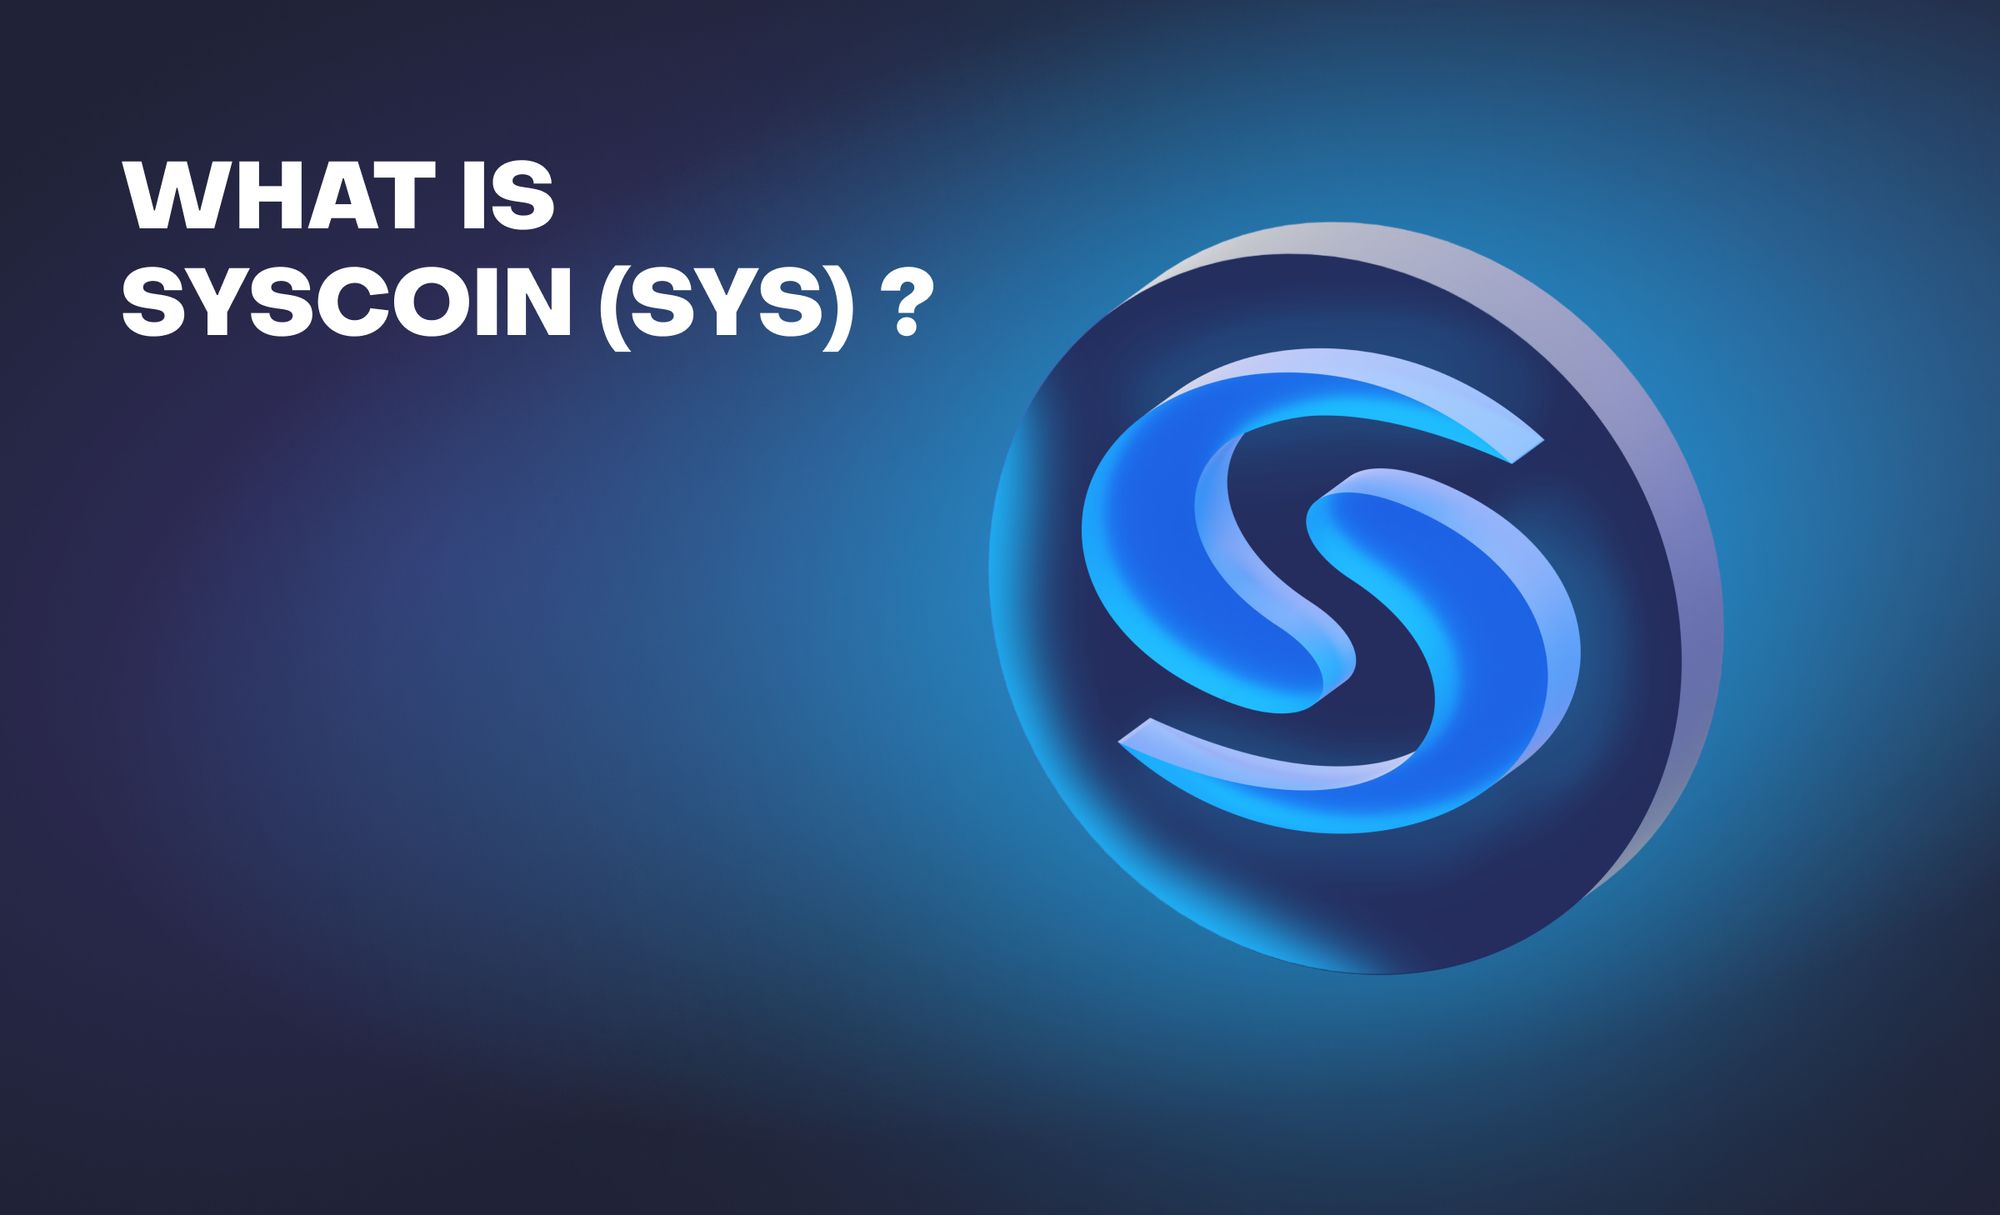 What Is Syscoin (SYS)?